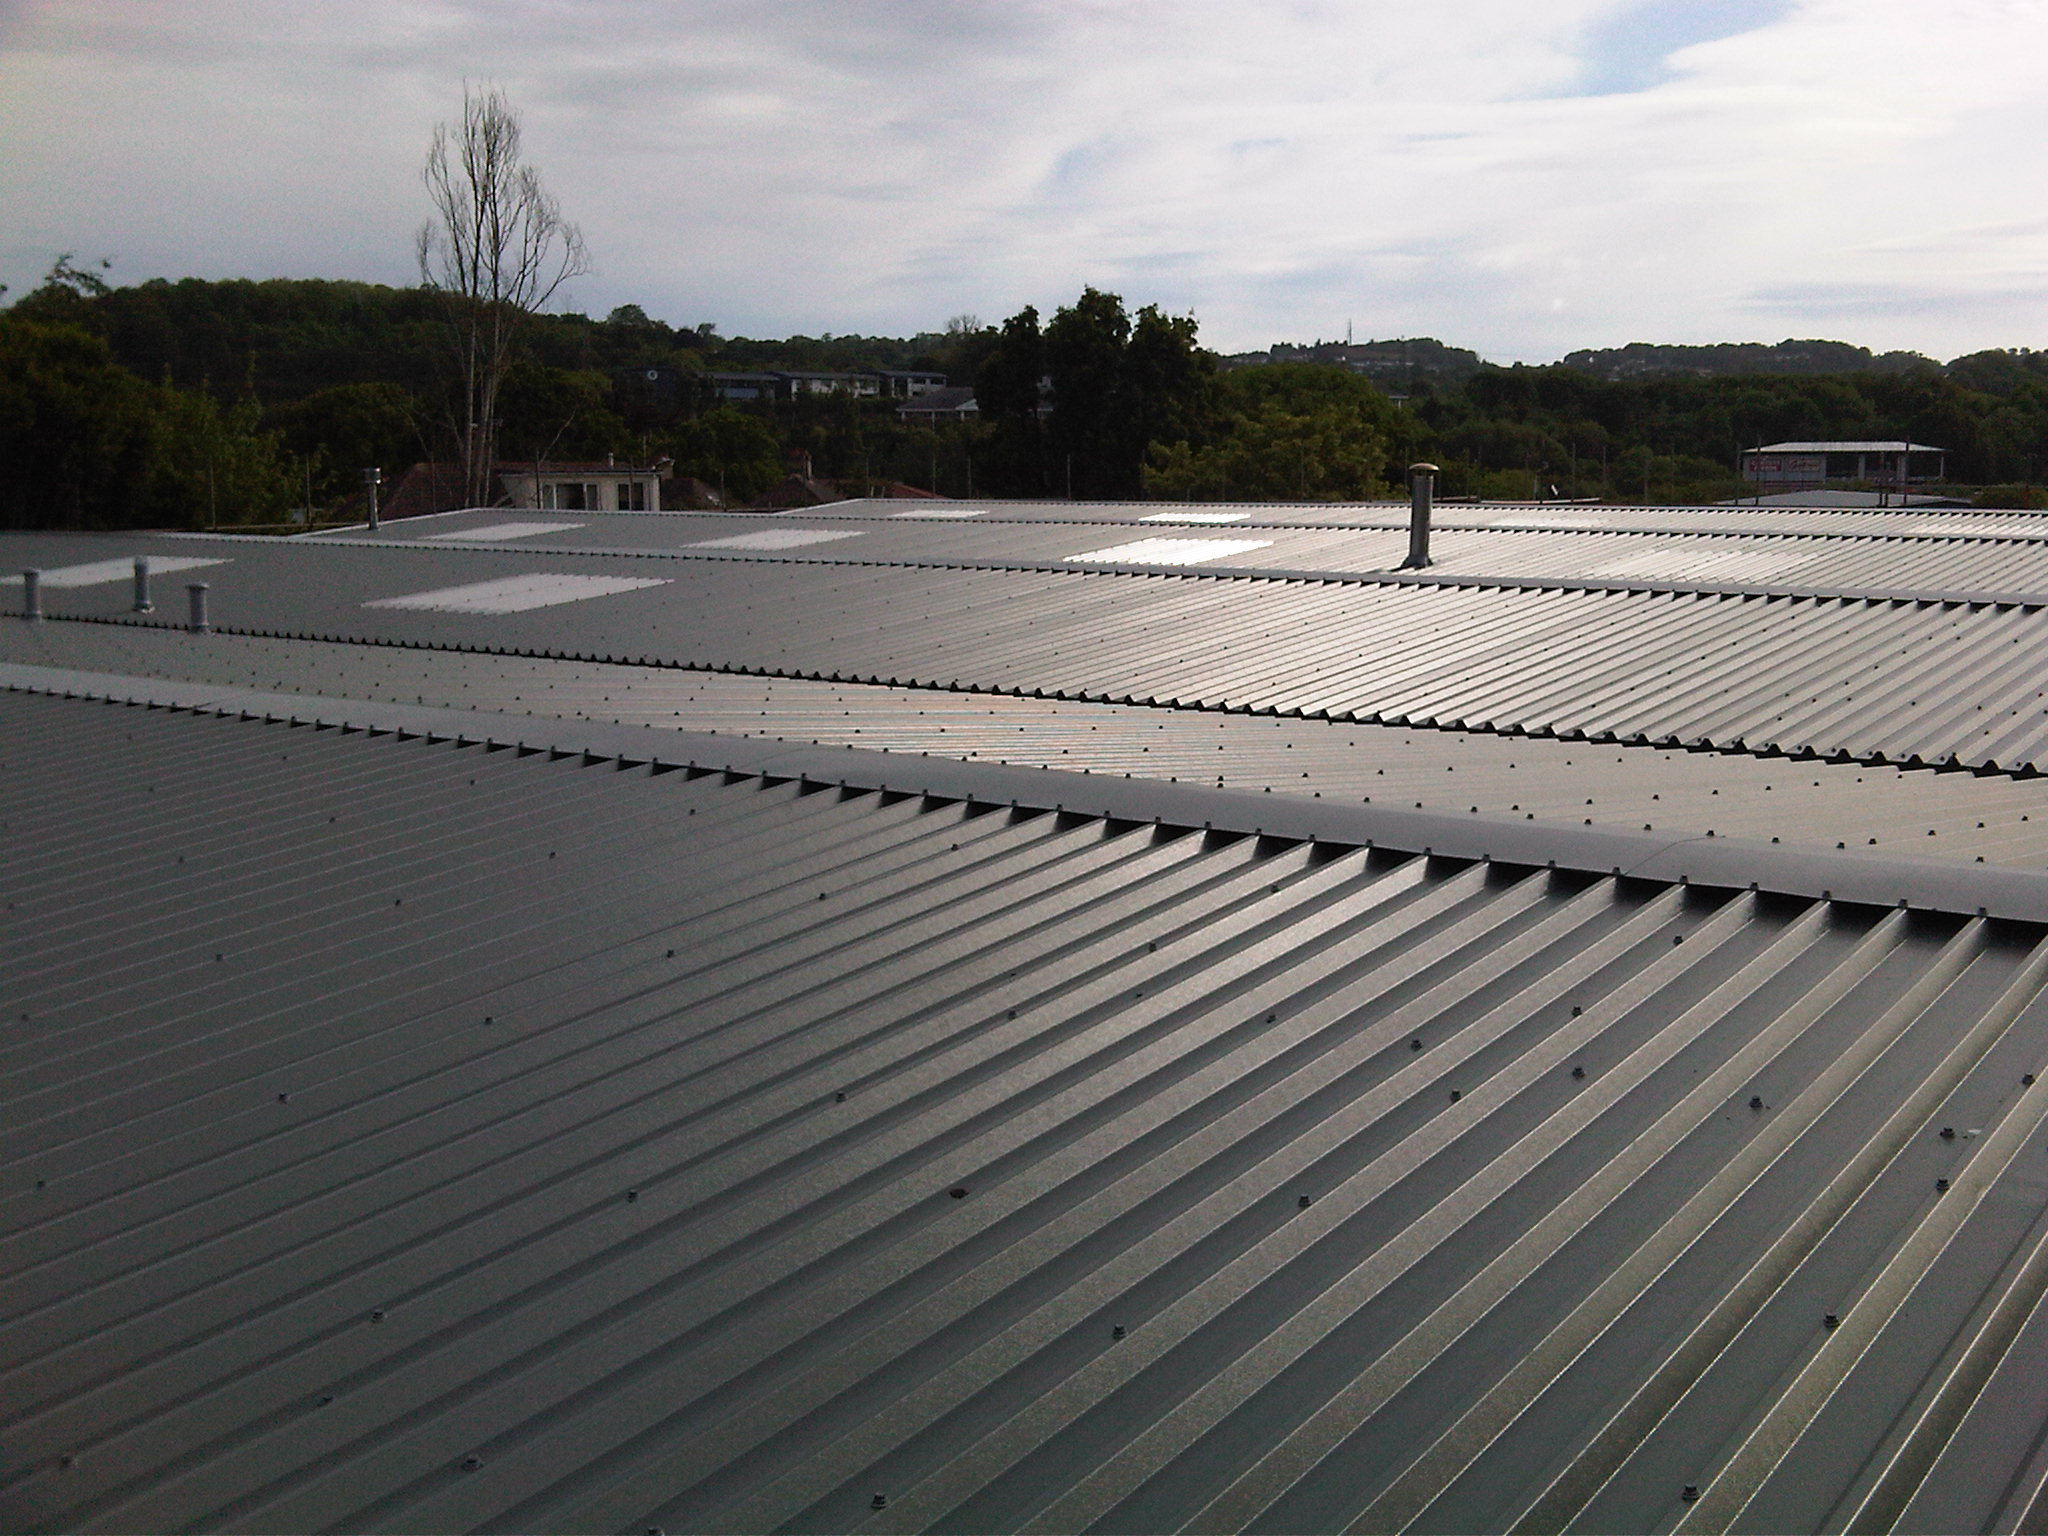 Gutter Lining Replacement and Oversheeting Roof to NHS Medical Records Building Devon